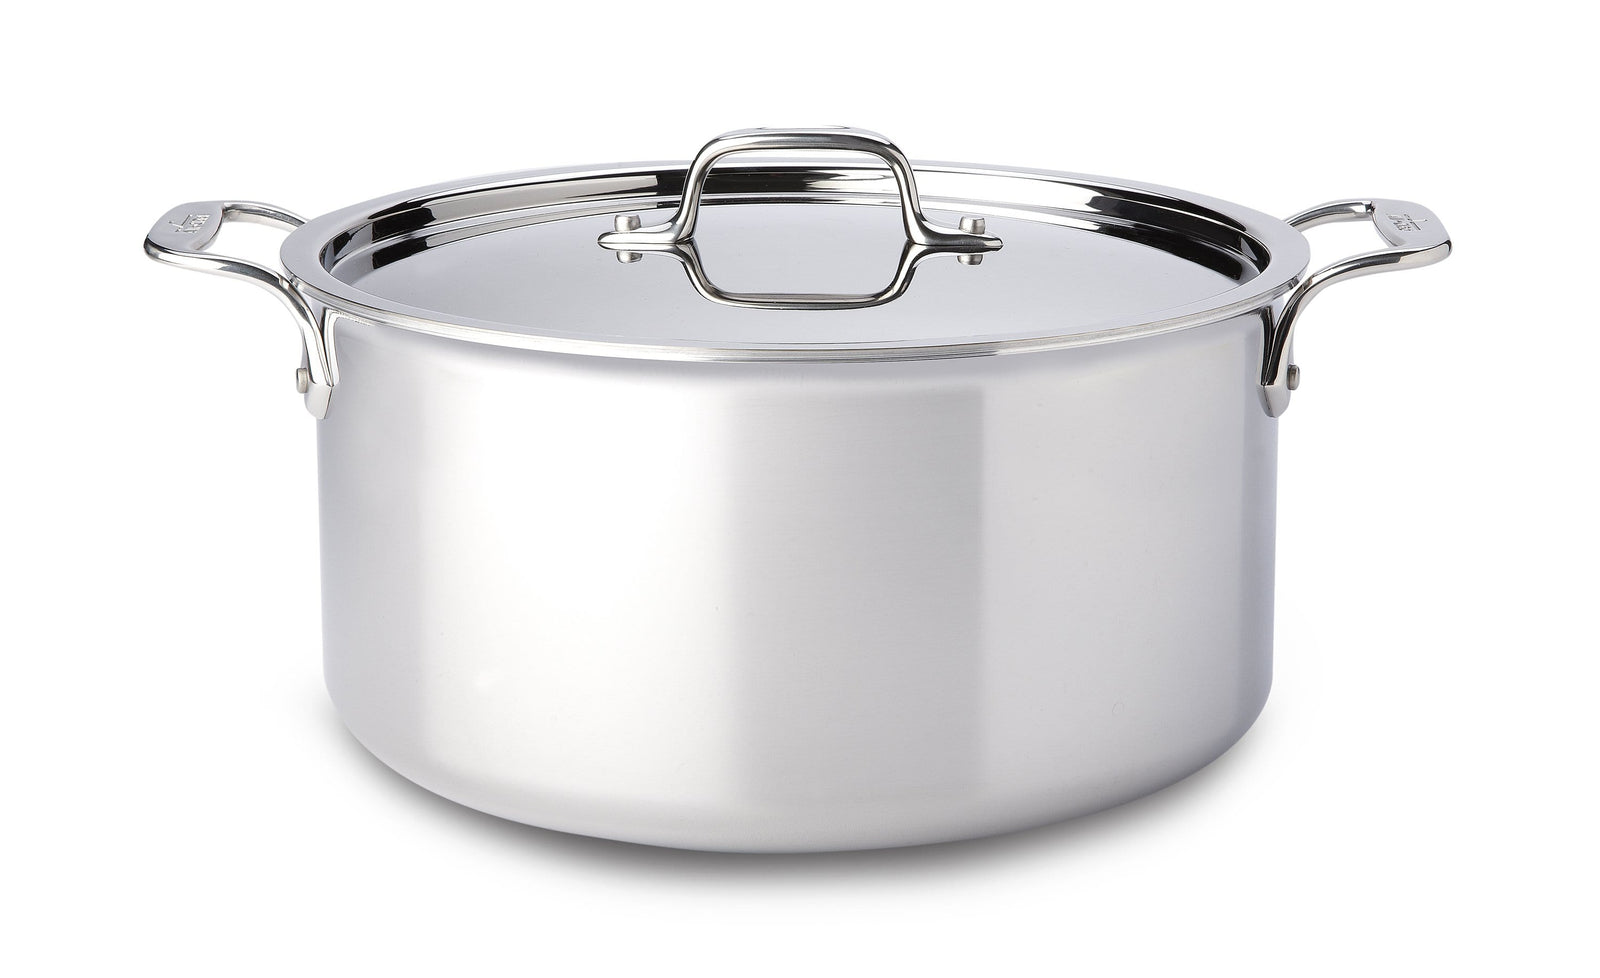 https://cdn.shopify.com/s/files/1/0474/2338/9856/products/all-clad-all-clad-stainless-steel-8-qt-stock-pot-011644502522-19591952597152_1600x.jpg?v=1604172931